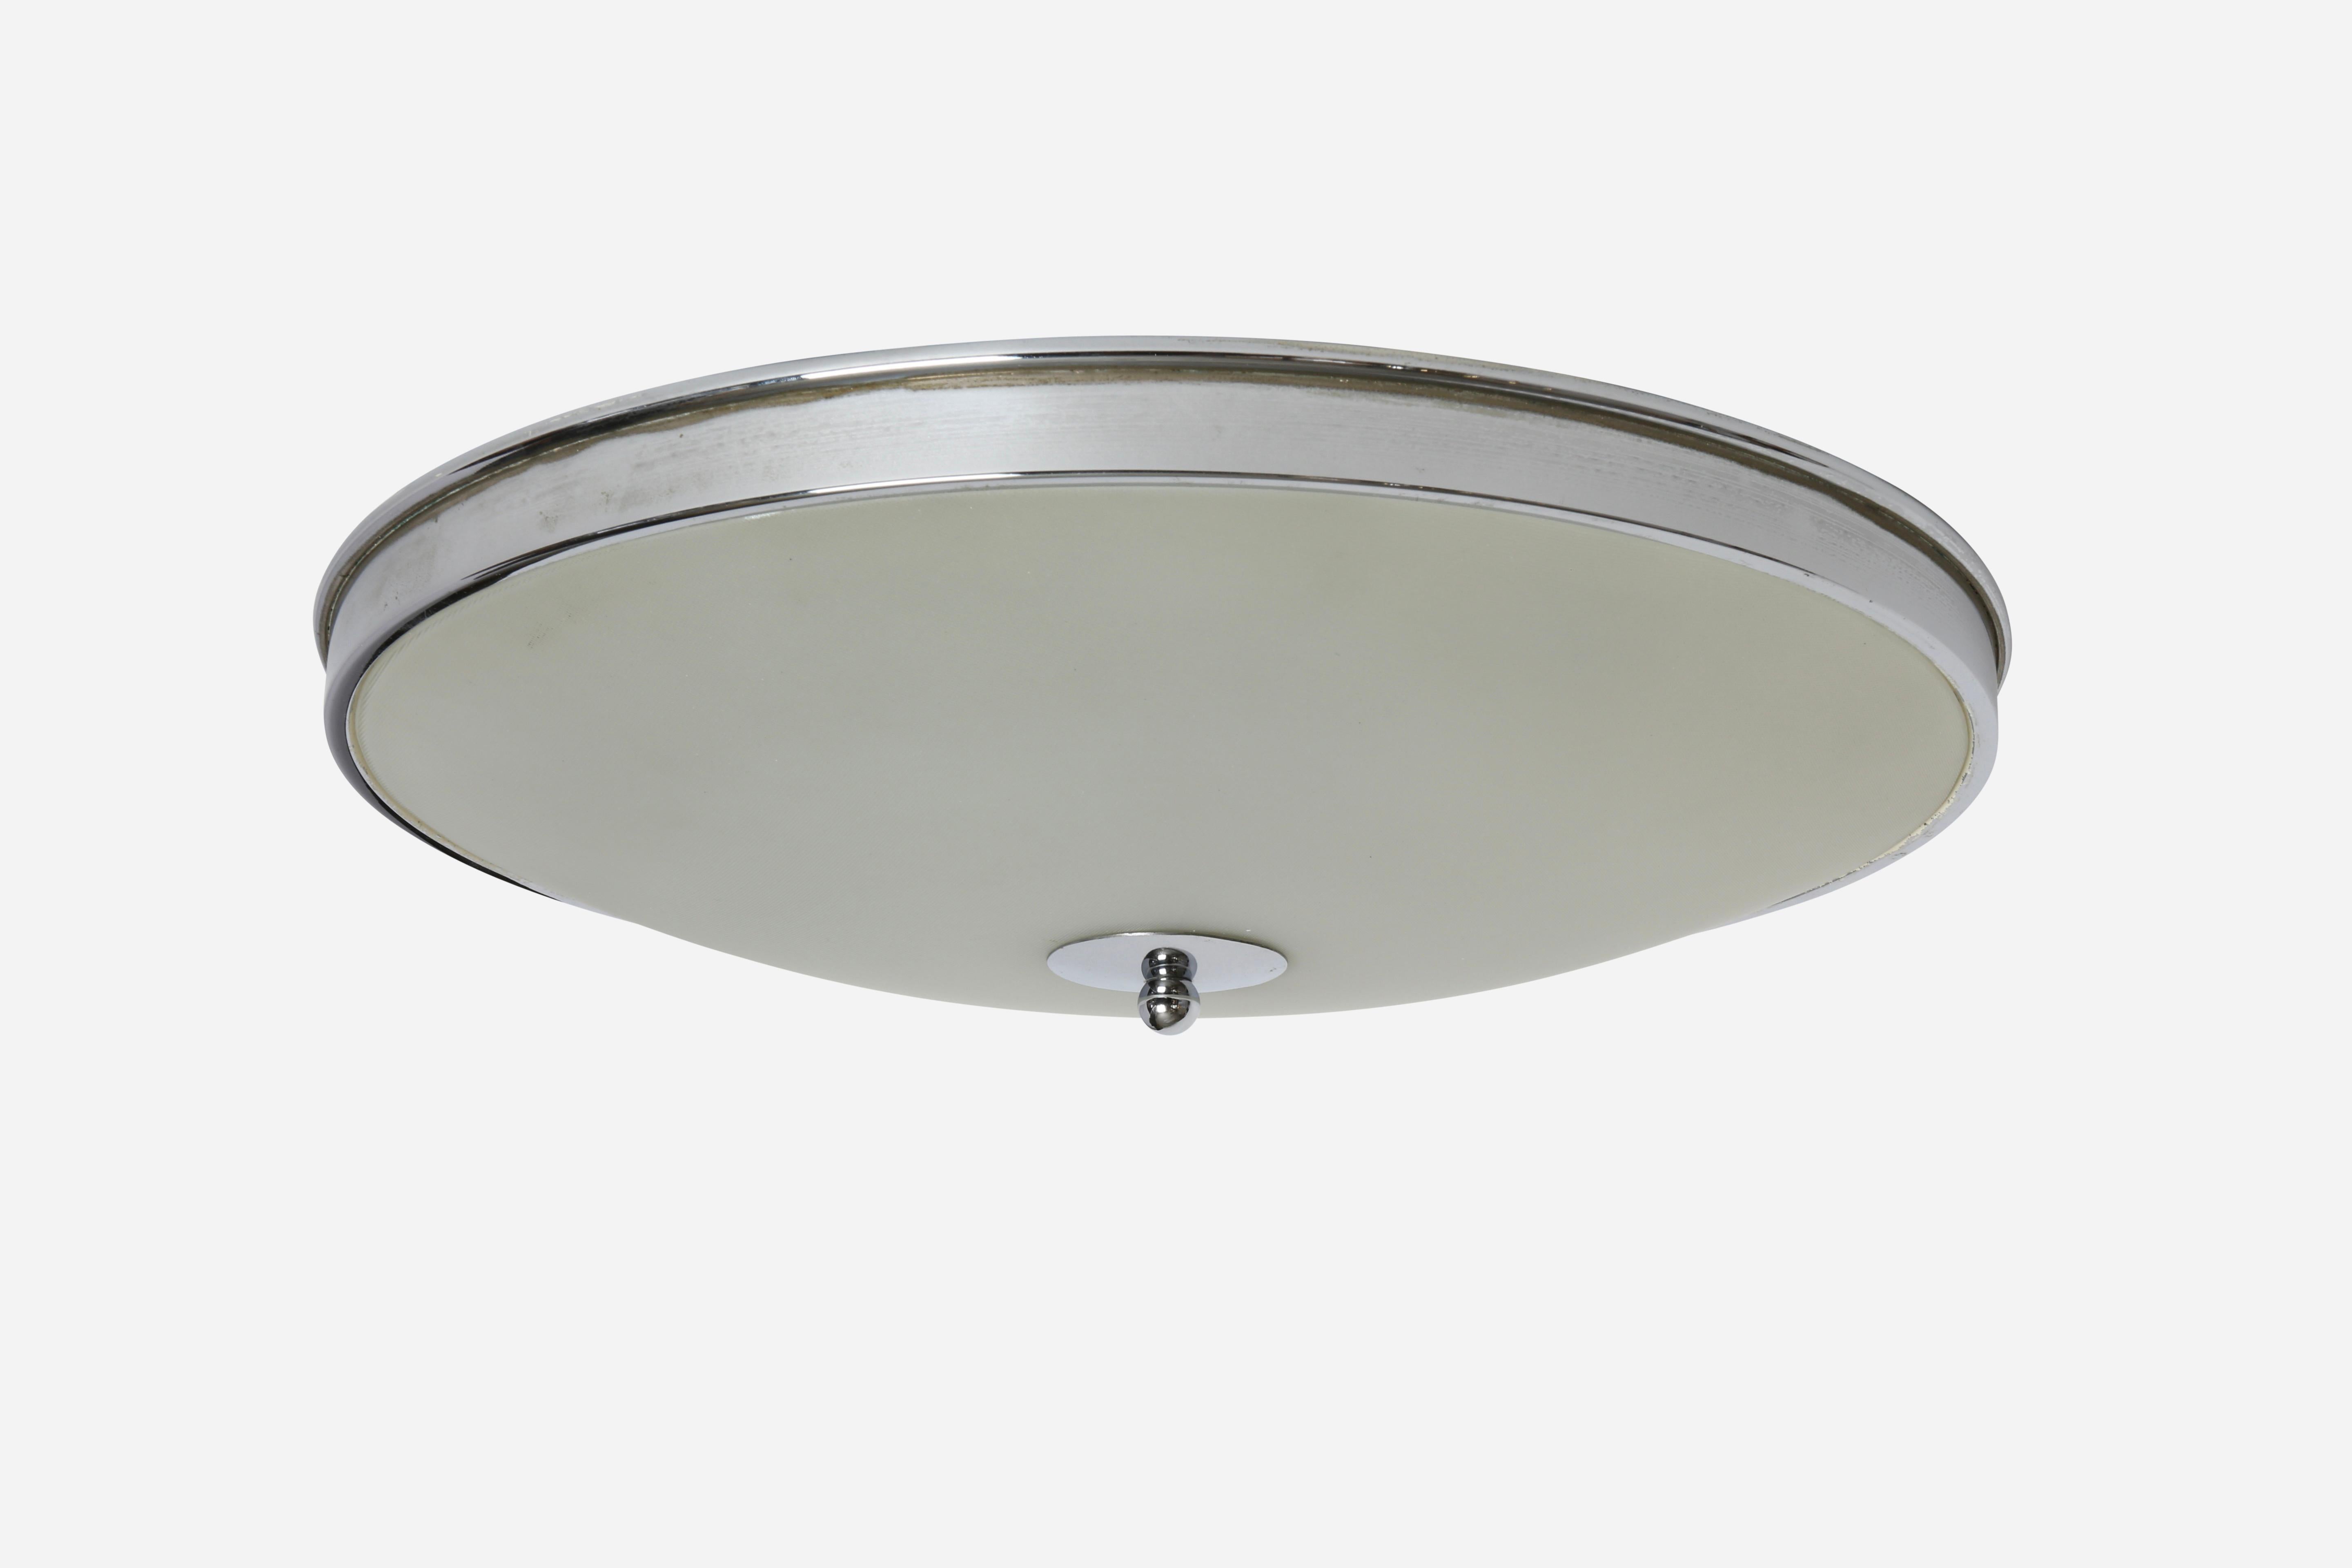 Pietro Chiesa attributed flush mount ceiling light
Made in Italy in 1960s
Textured glass, chrome plated brass.
Takes 3 candelabra bulbs.
Complimentary US rewiring upon request.